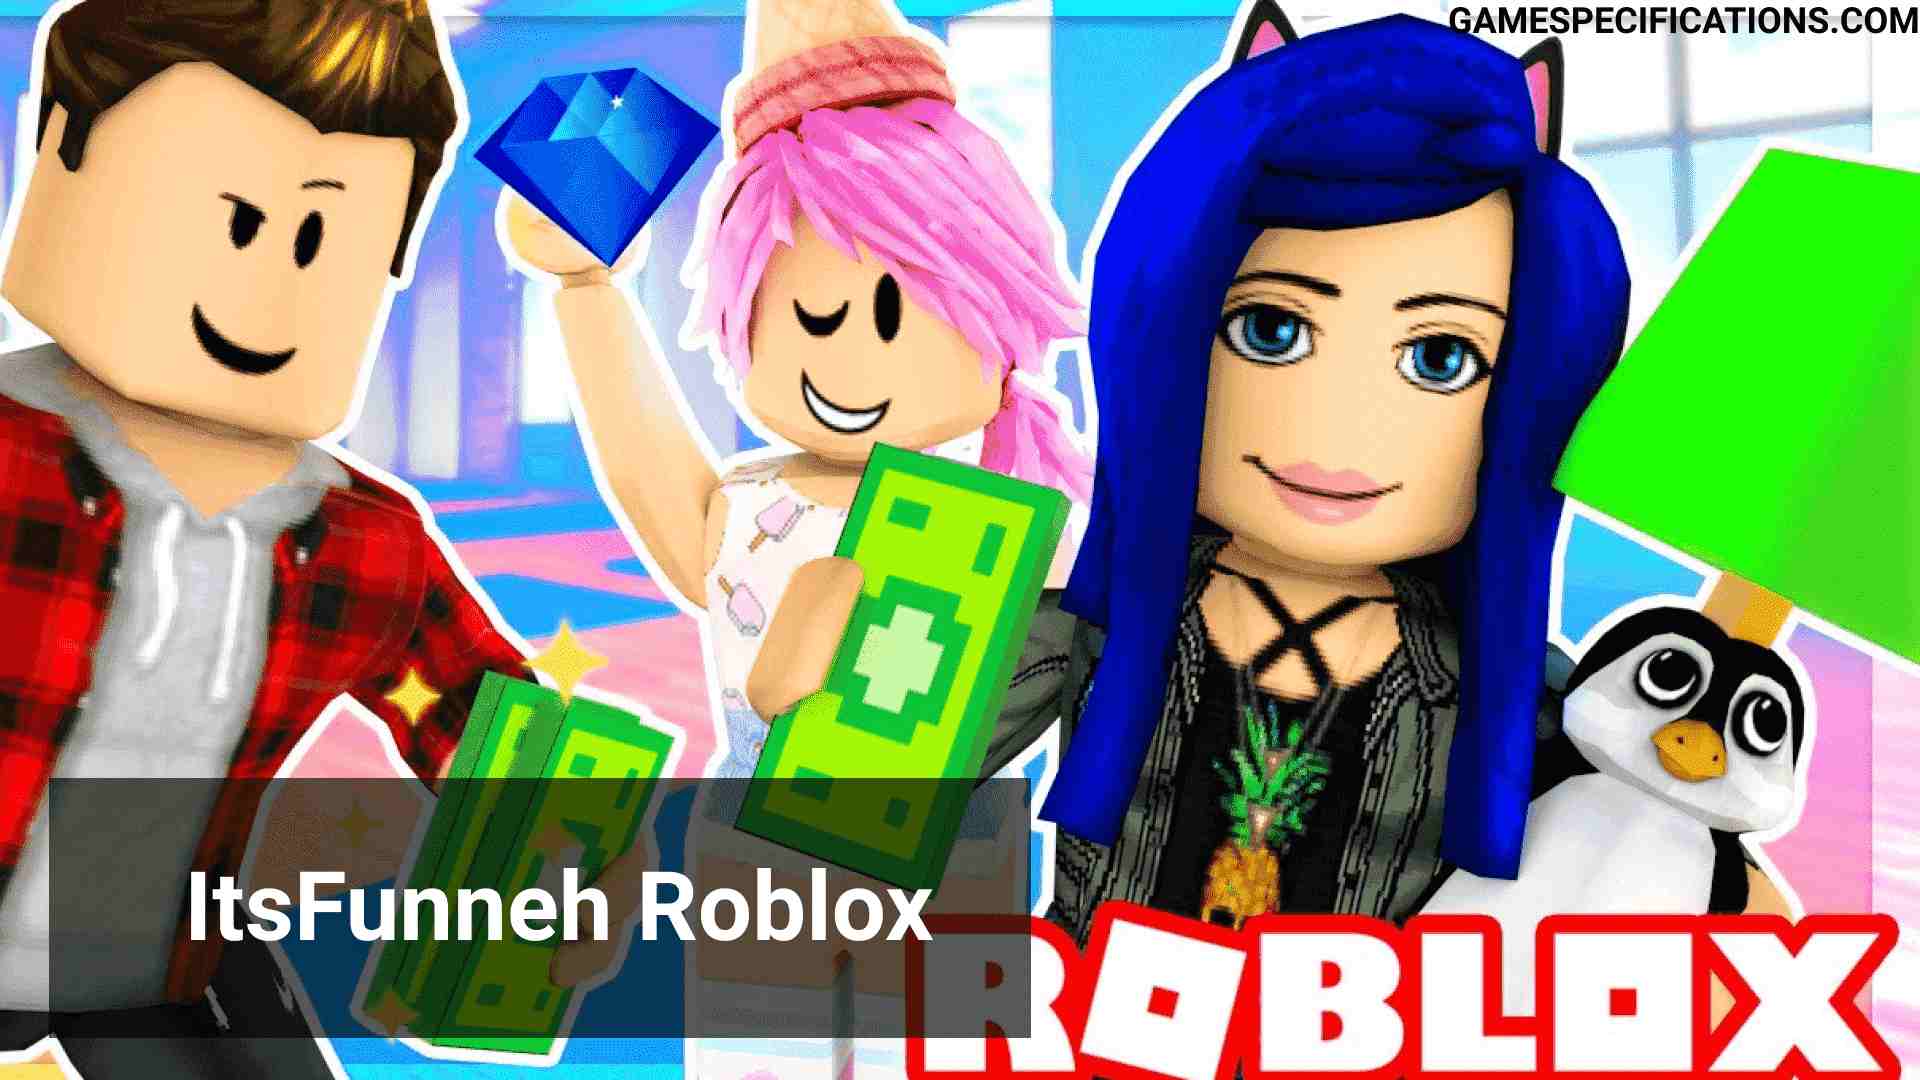 Itsfunneh Roblox Legendary Top Videos Game Specifications - itsfunneh roblox obby